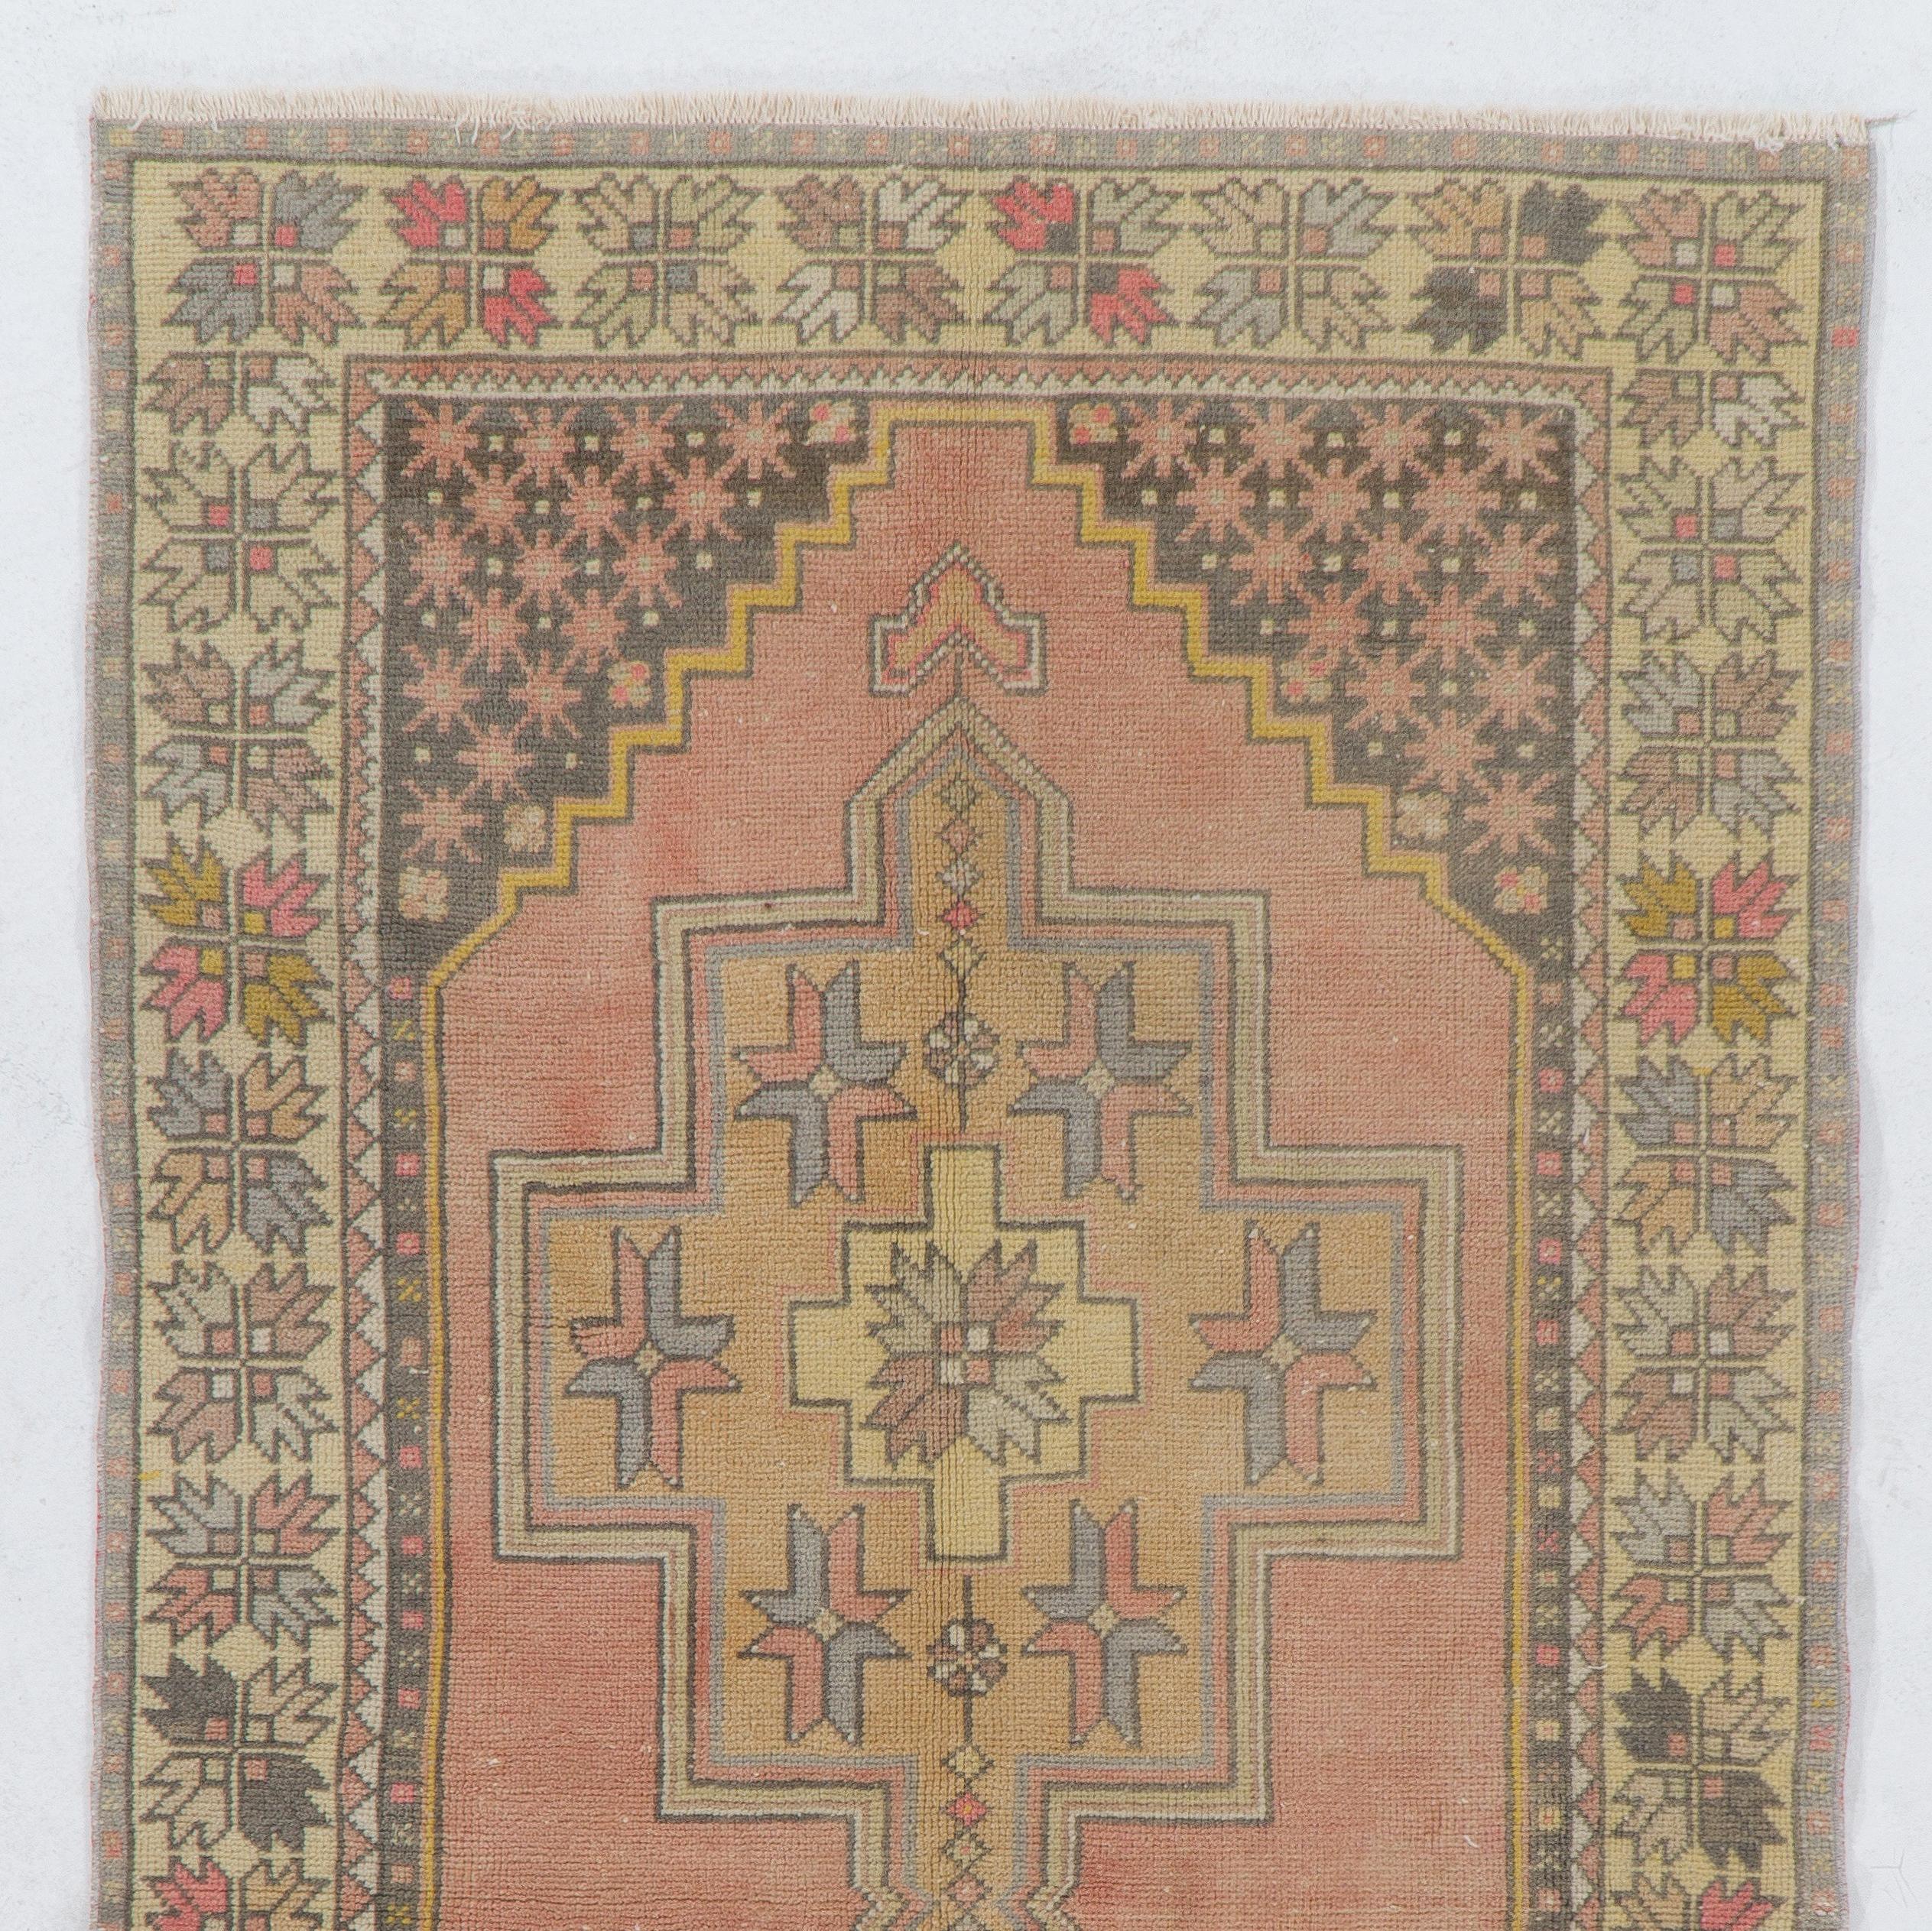 This vintage Central Anatolian rug features two linked medallions in soft tan and gold colors and cross-shaped motifs inside against a plain field in soft muted red. The corner-pieces in charcoal gray are decorated with large, elongated palmettes.